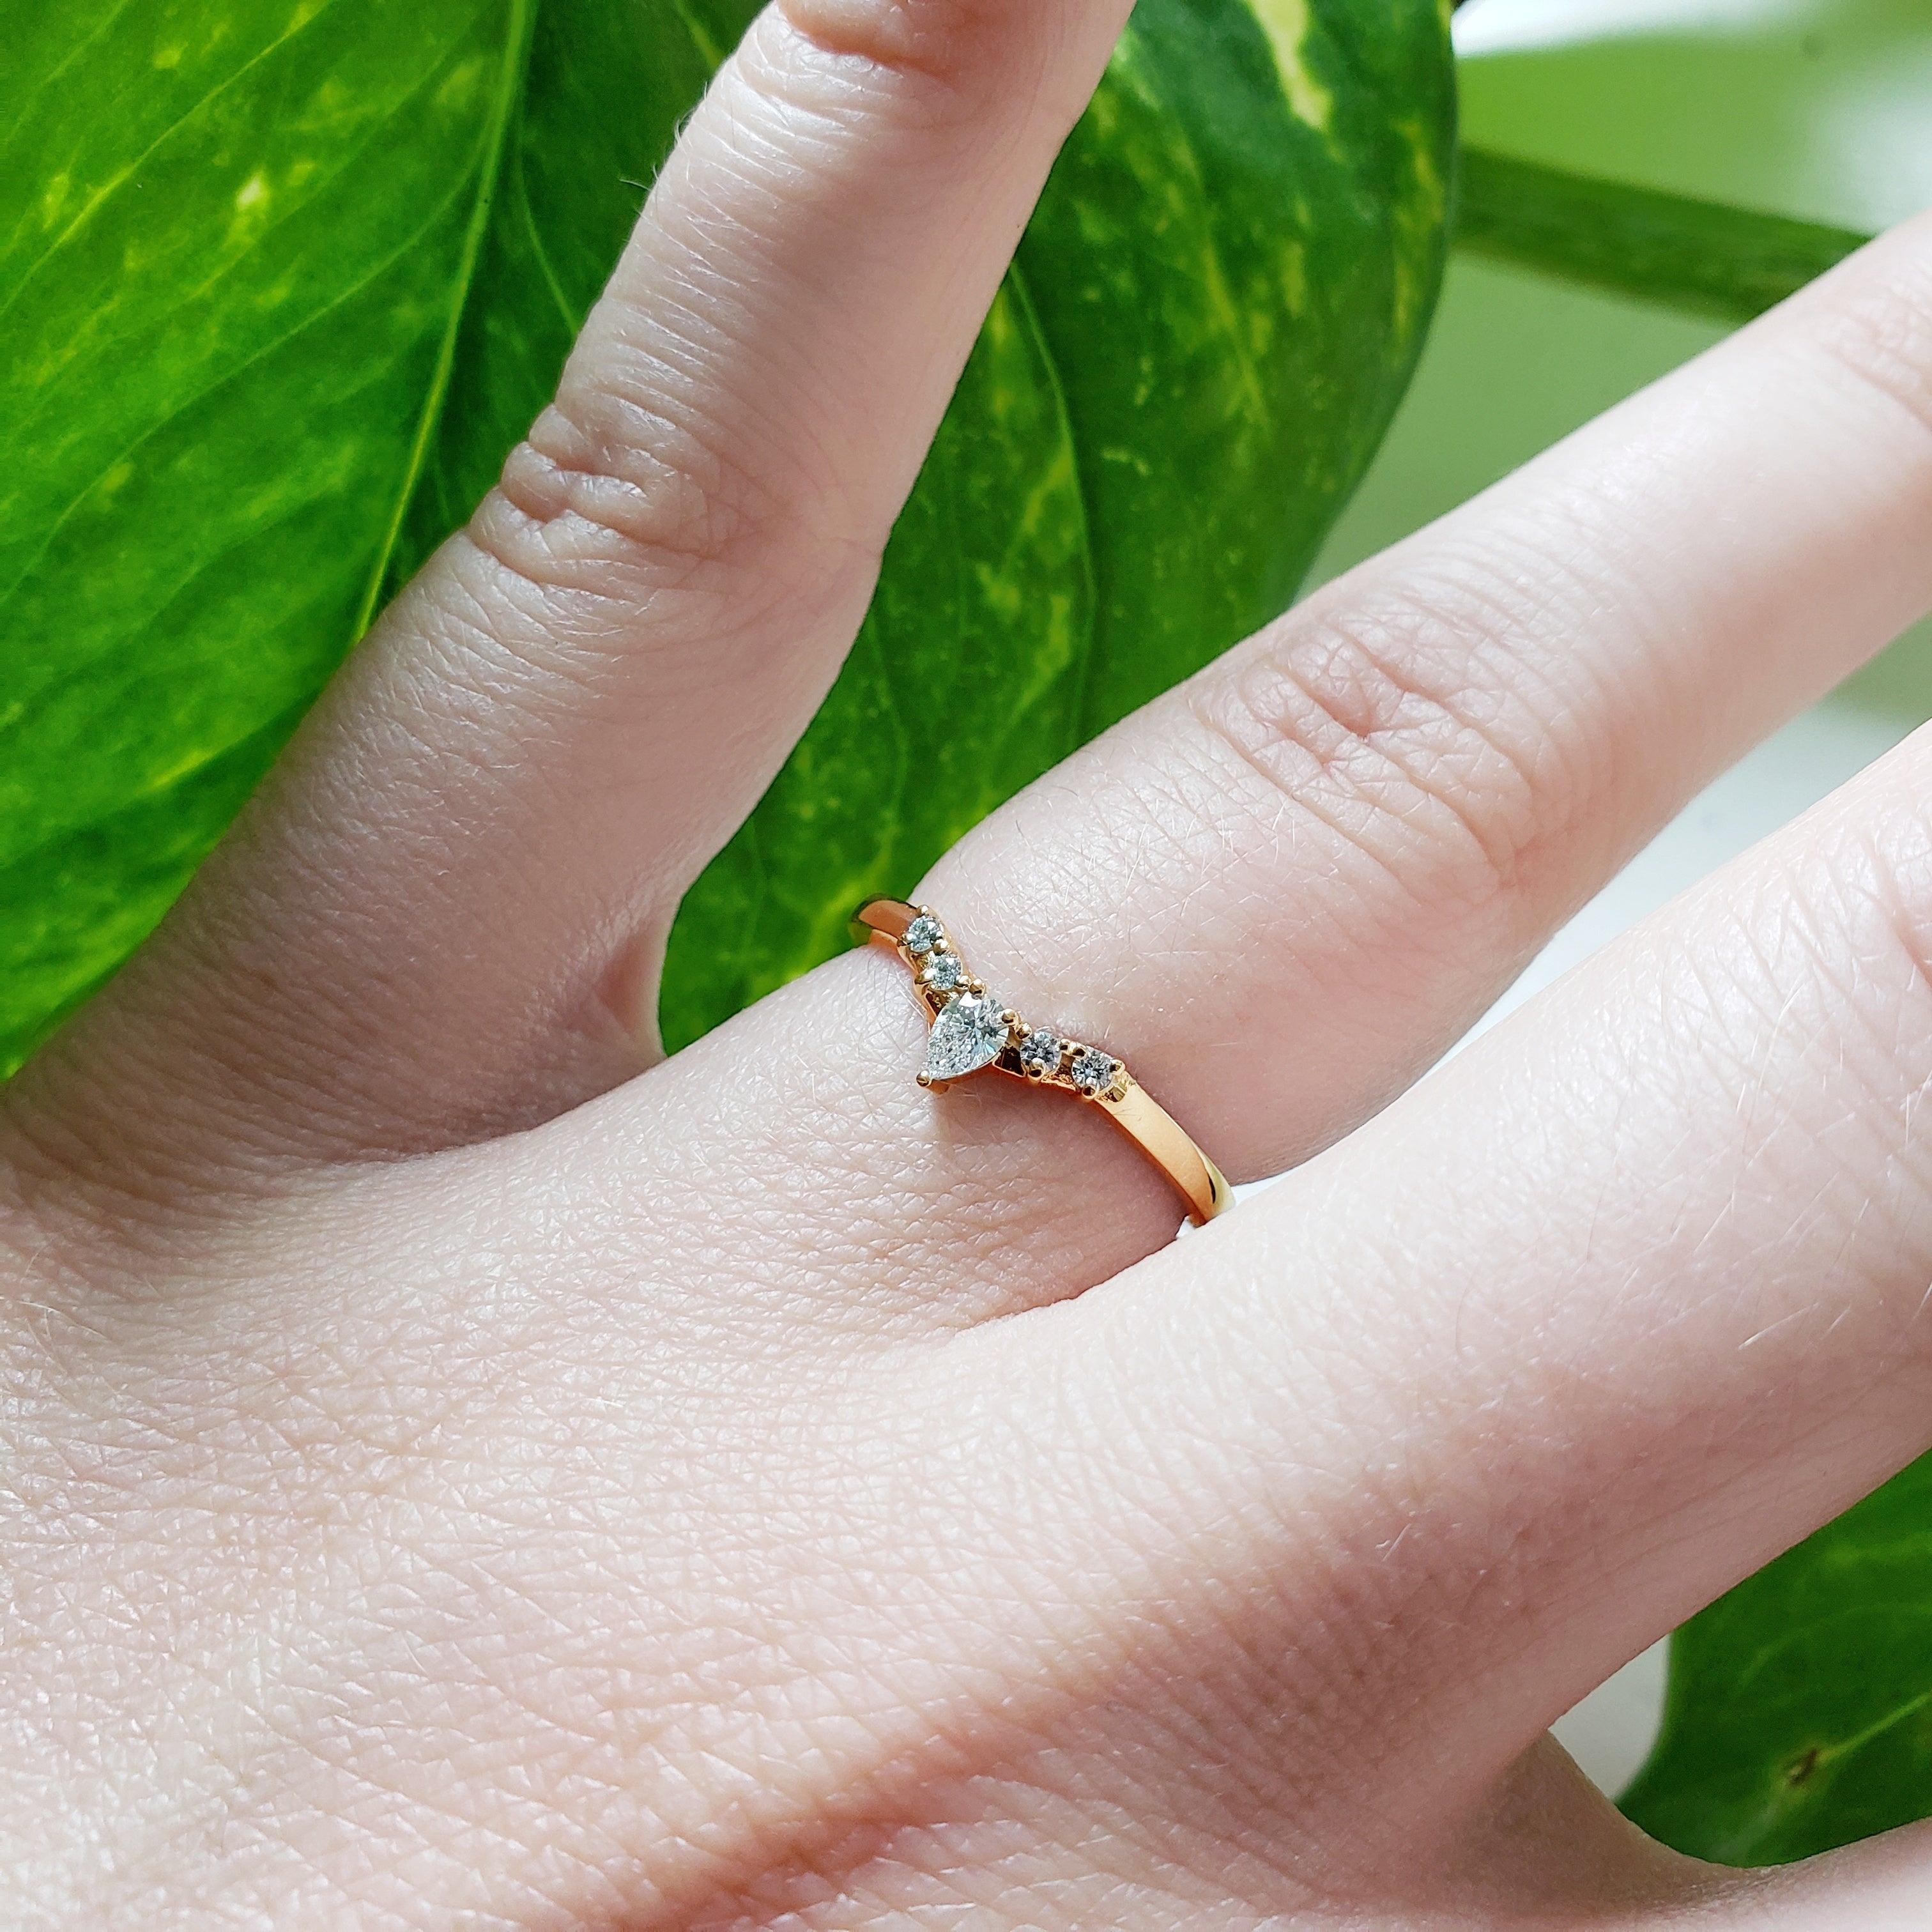 Let's see your Non-engagement ring designs! : r/Moissanite